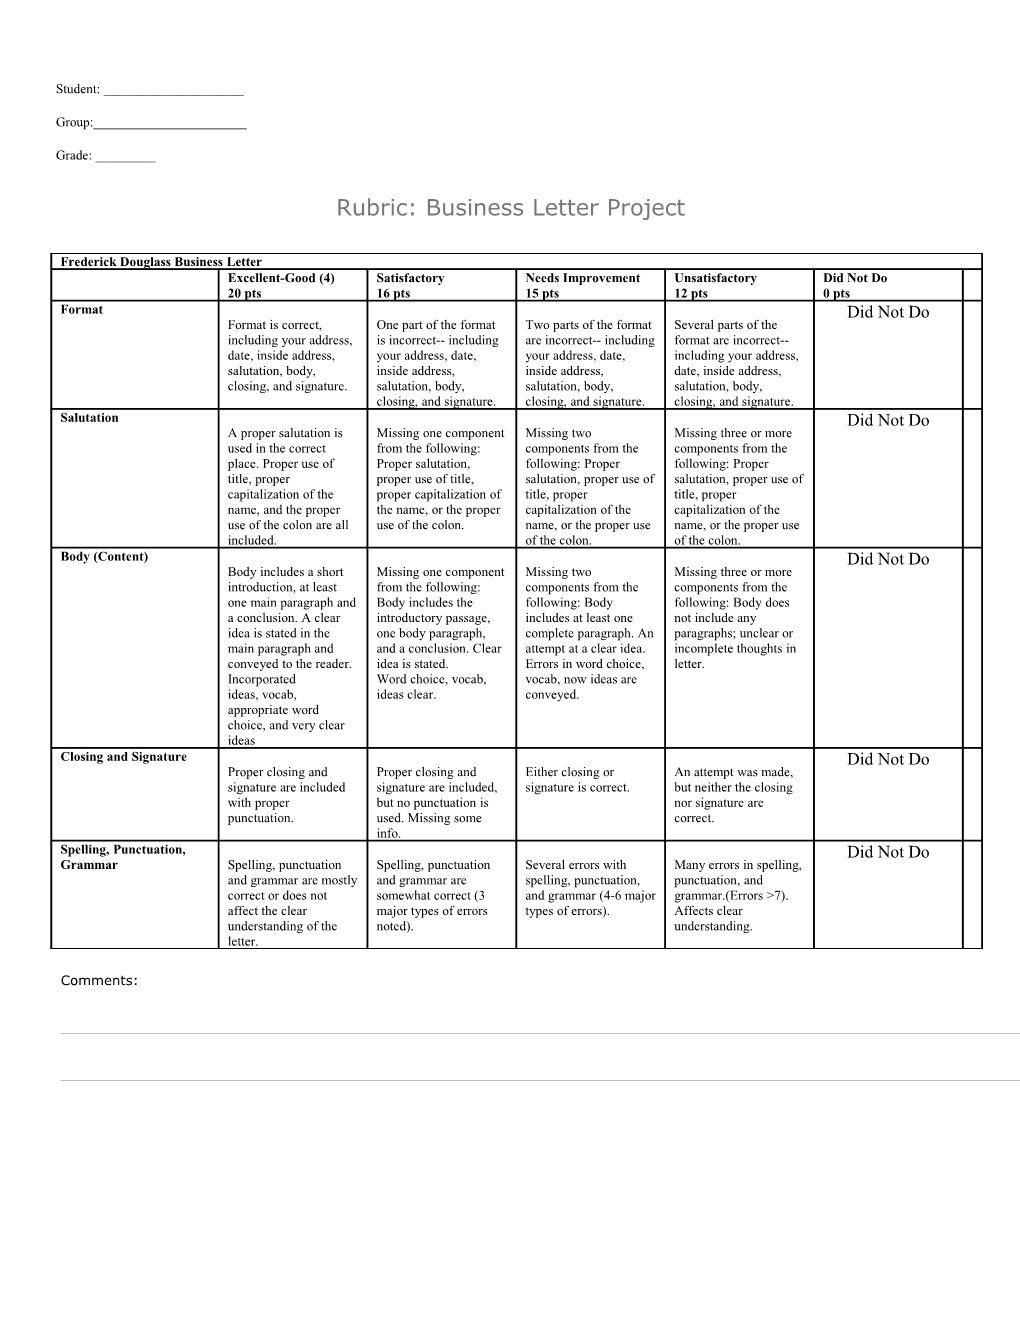 Rubric: Business Letter Project